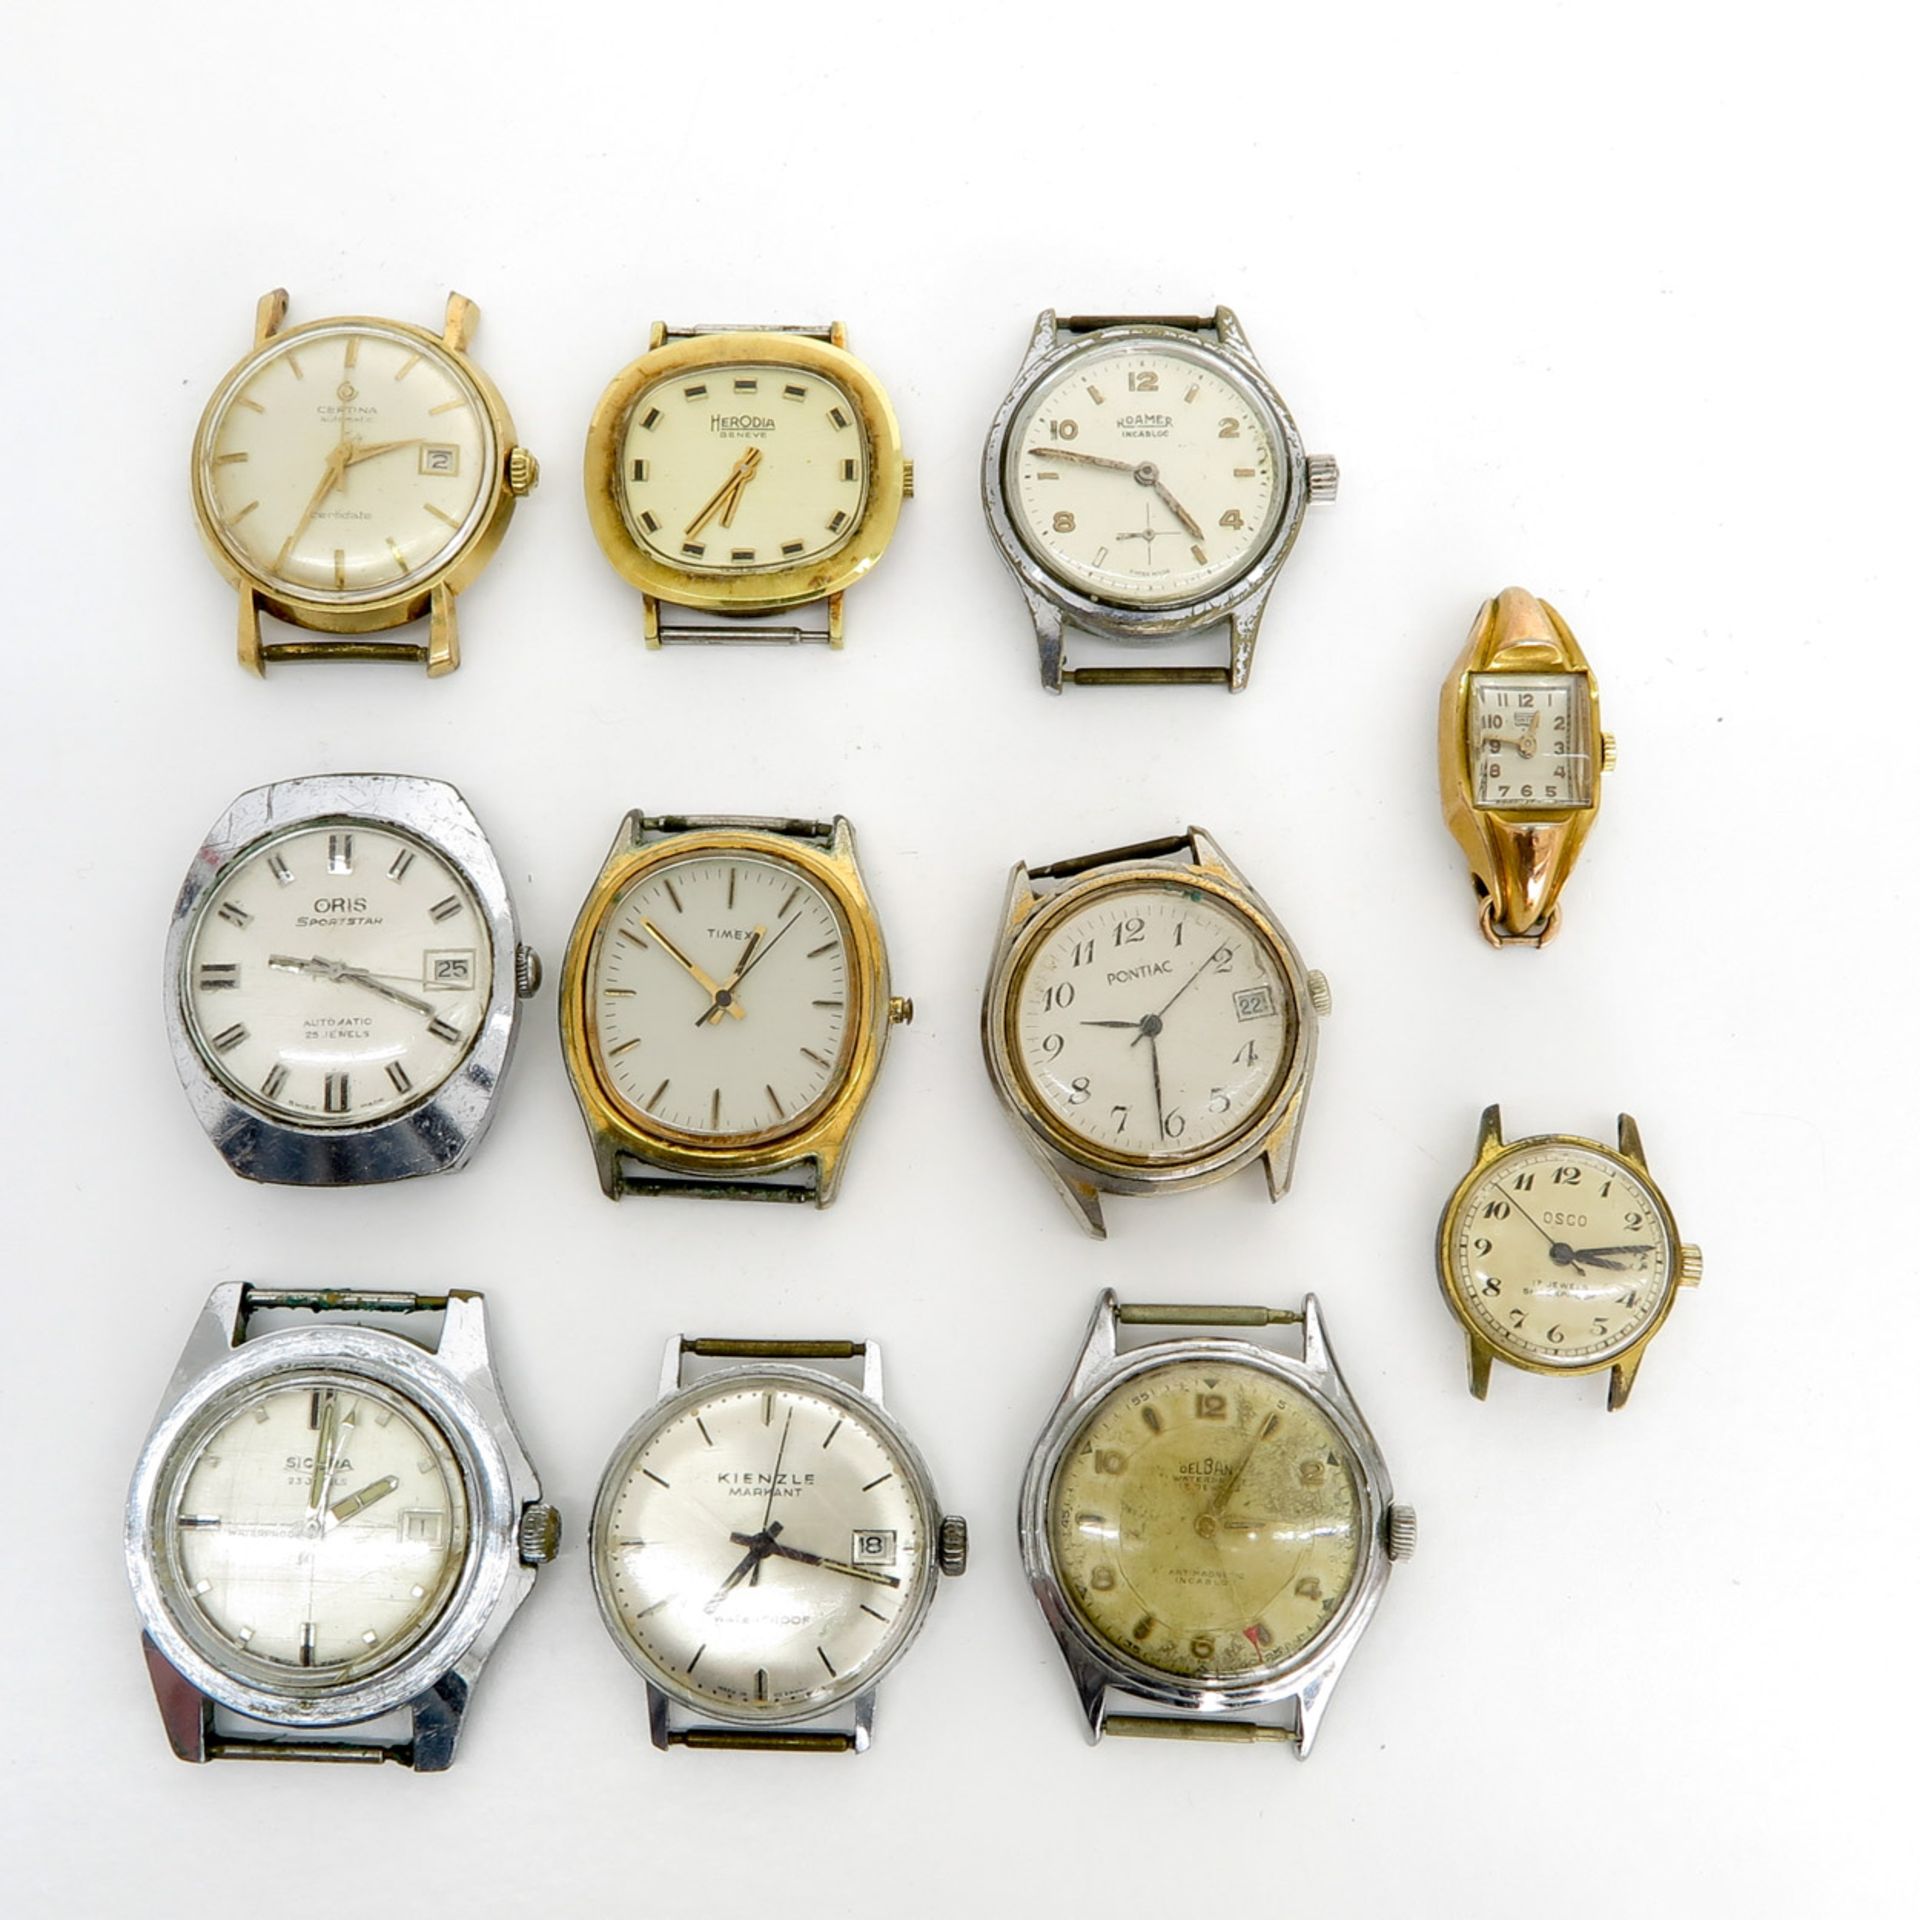 Lot of 11 Watch Faces